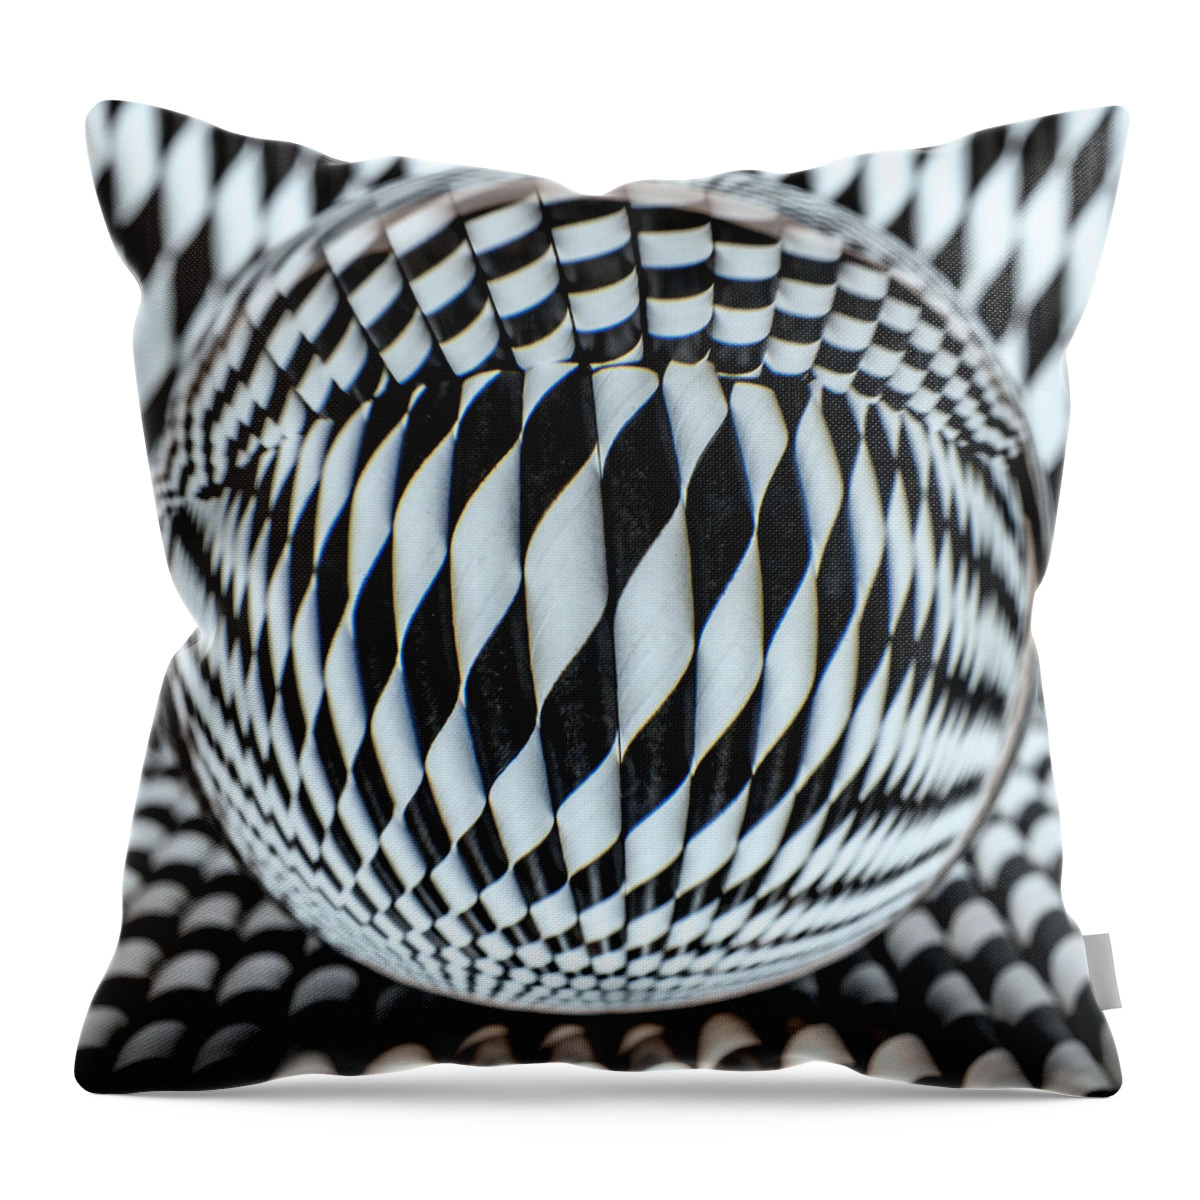 Black And White Throw Pillow featuring the photograph Paper Straw Patterns by Sandi Kroll